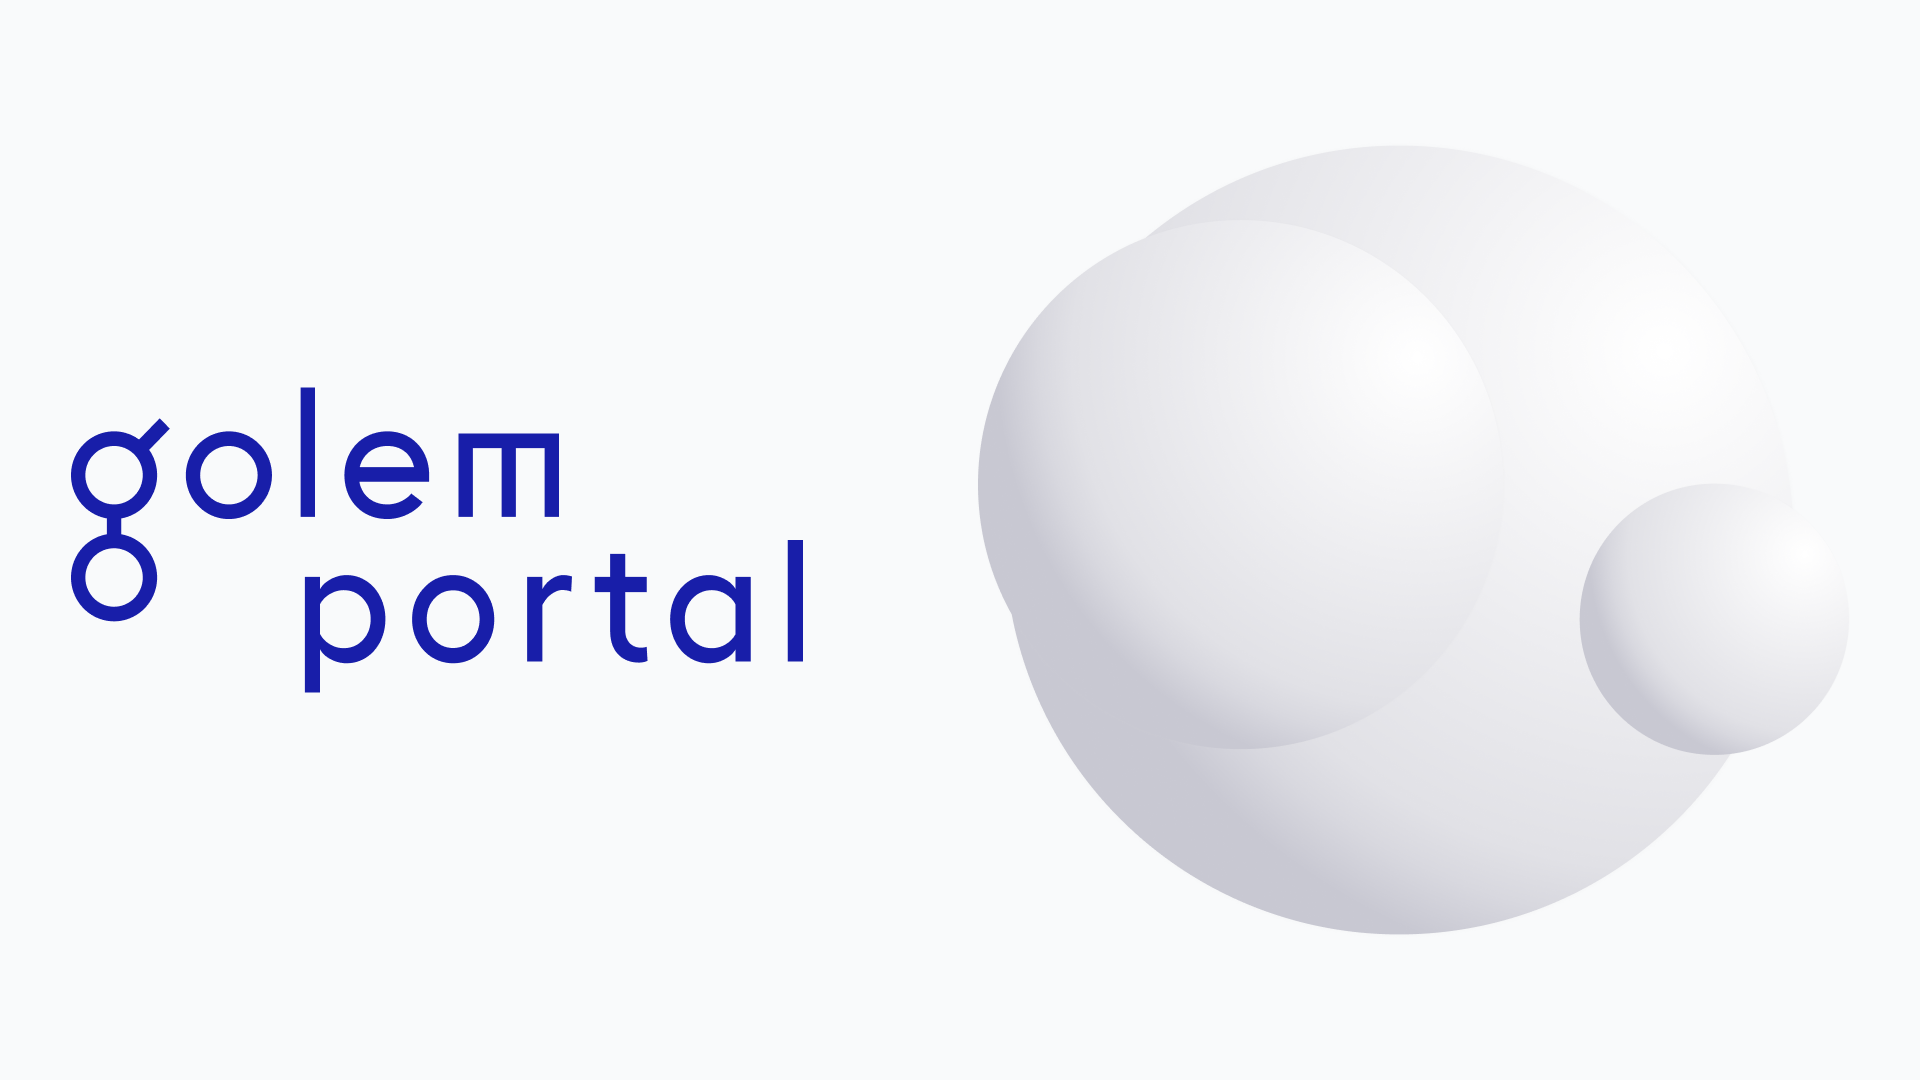 Golem Portal has been launched!